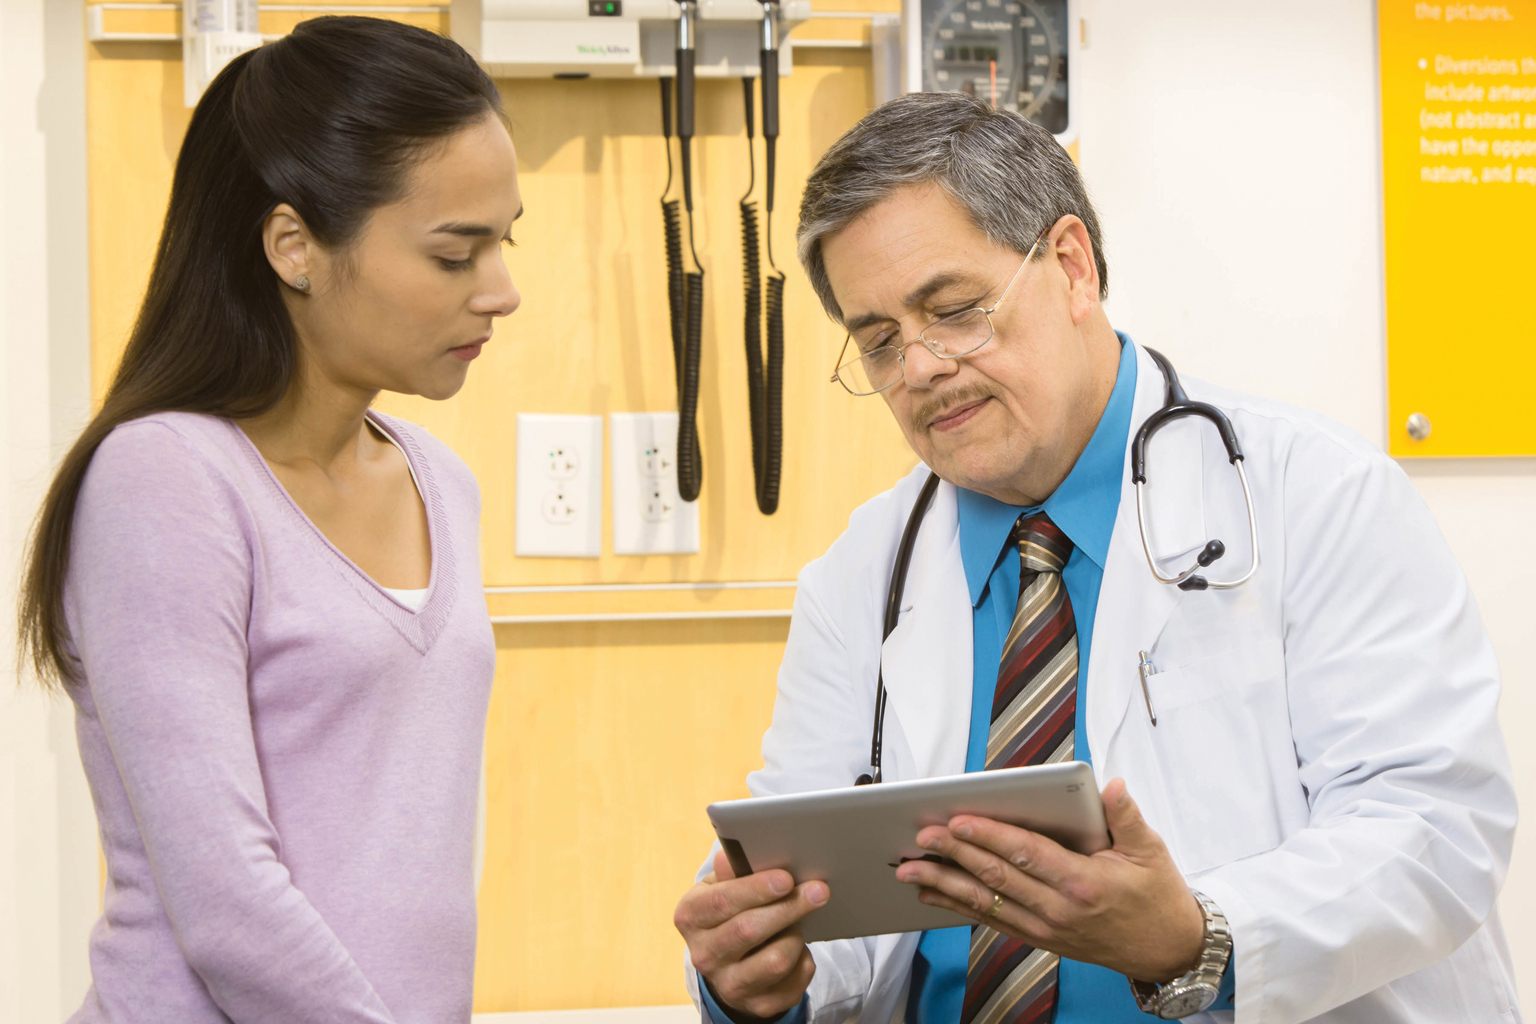 Male doctor and female patient looking at UpTodate on a tablet